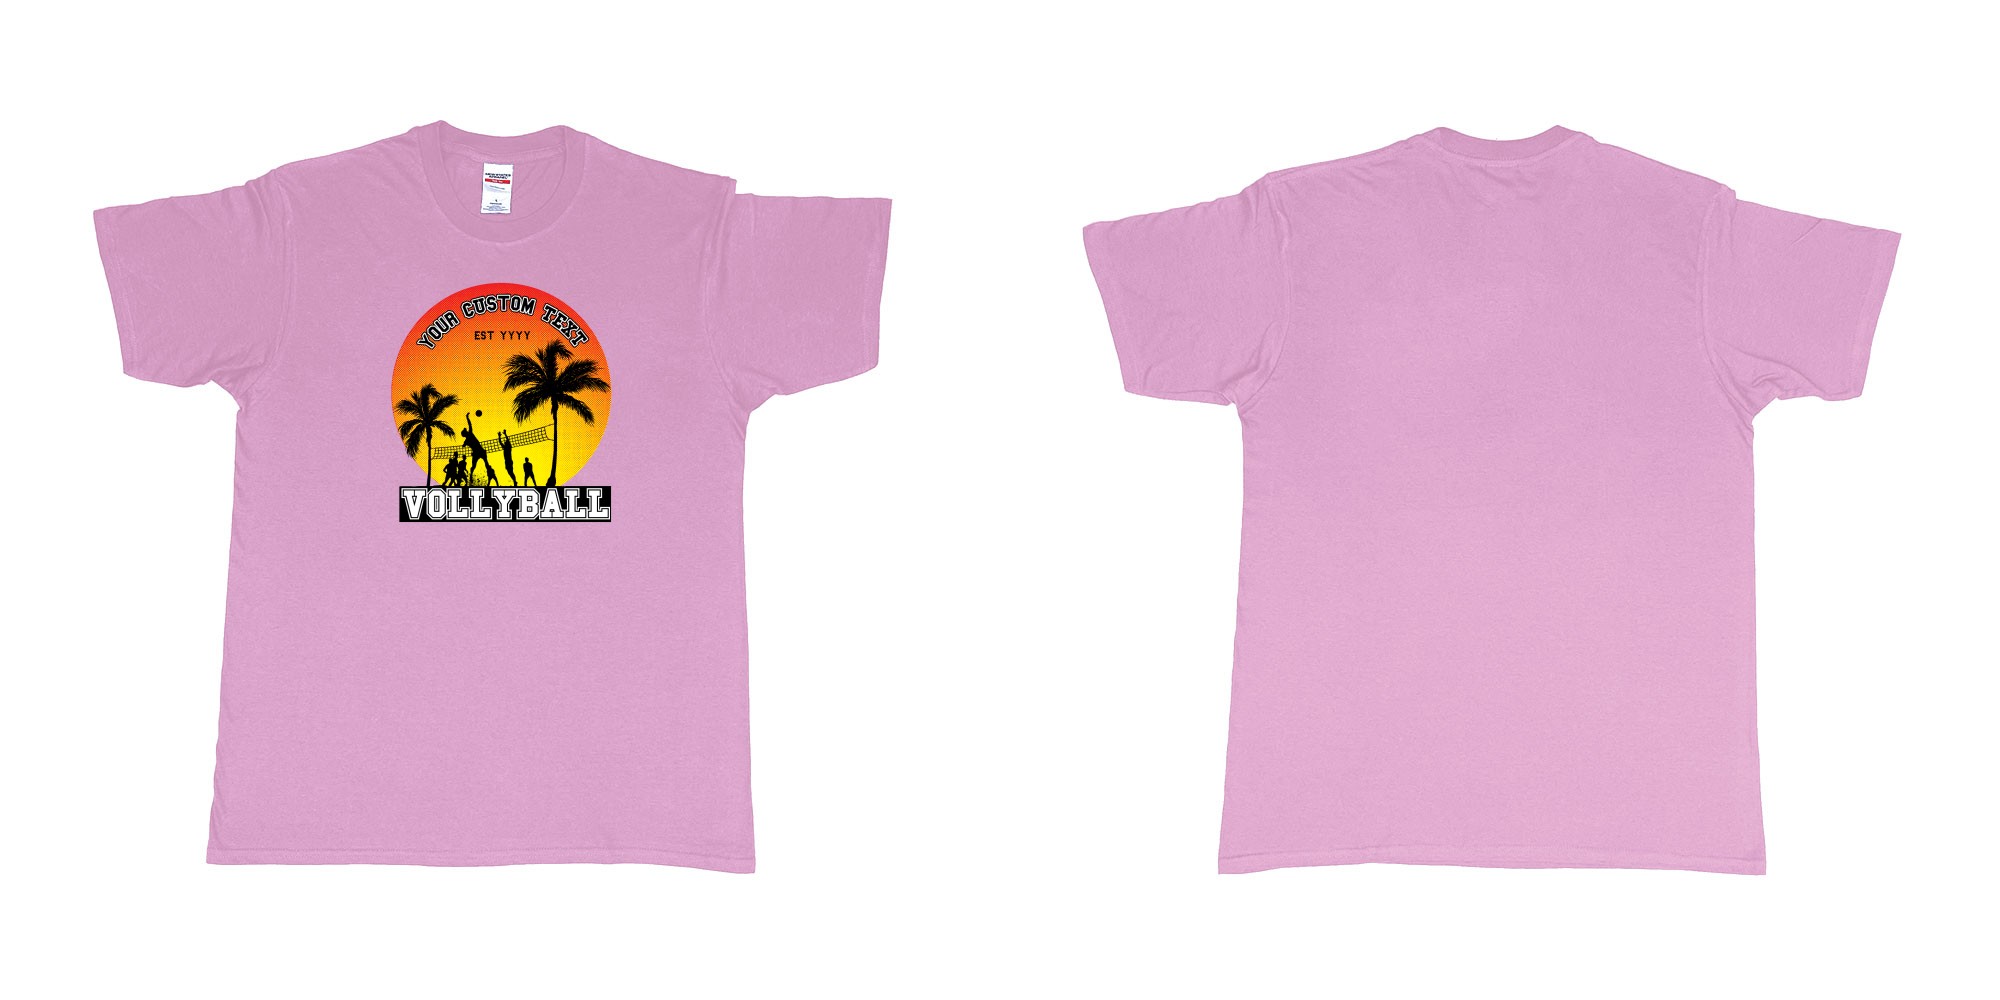 Custom tshirt design sunset volleyball t shirt with a sunset view and your custom print text and year in fabric color light-pink choice your own text made in Bali by The Pirate Way